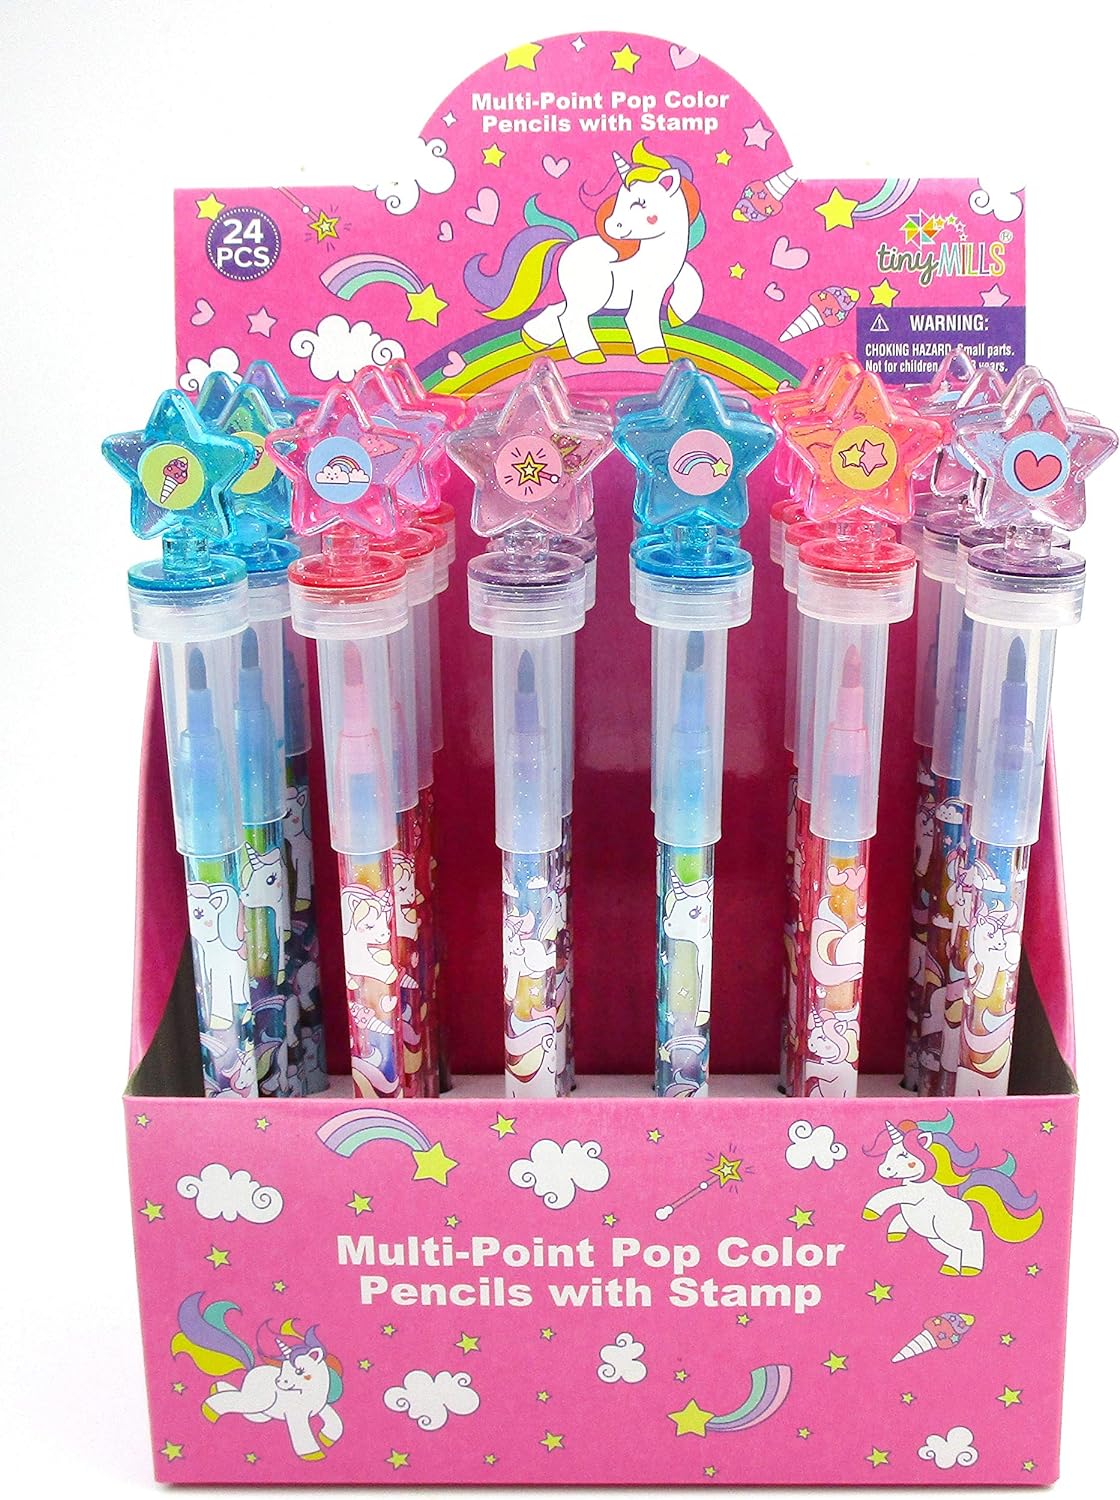 TINYMILLS 24 Pcs Unicorn Rainbow 2 in 1 Stacking Crayons with Stamp Topper